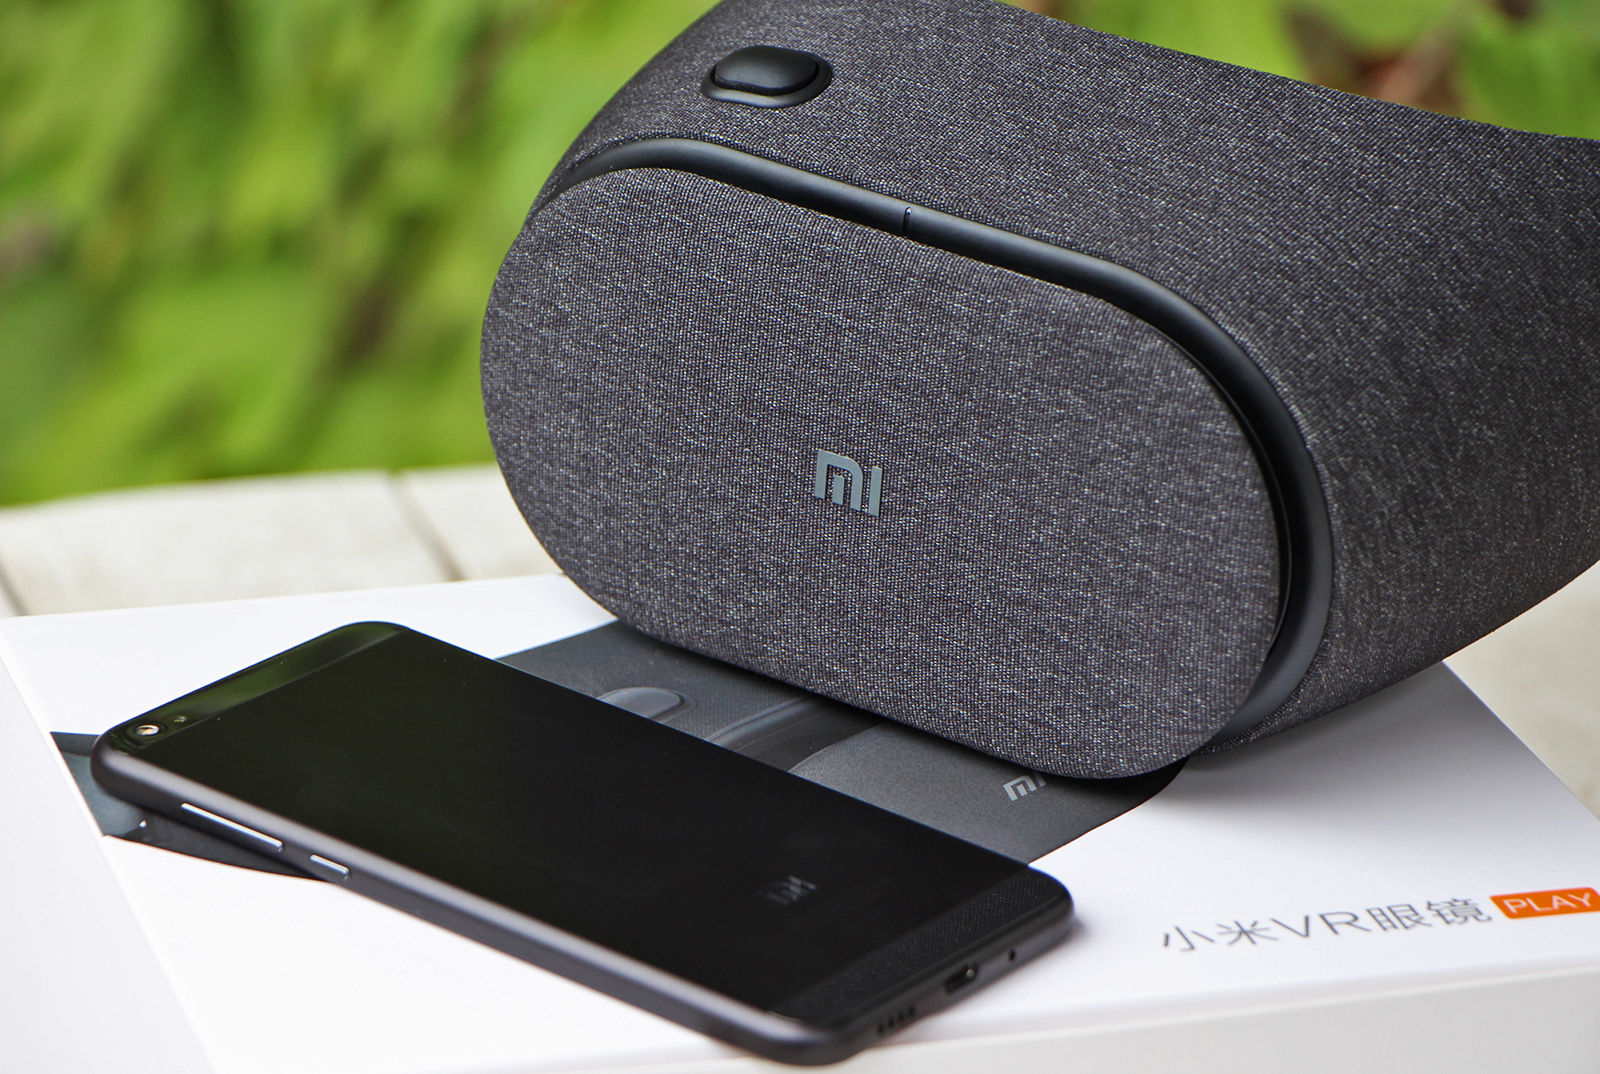 xiaomi vr play 2 review